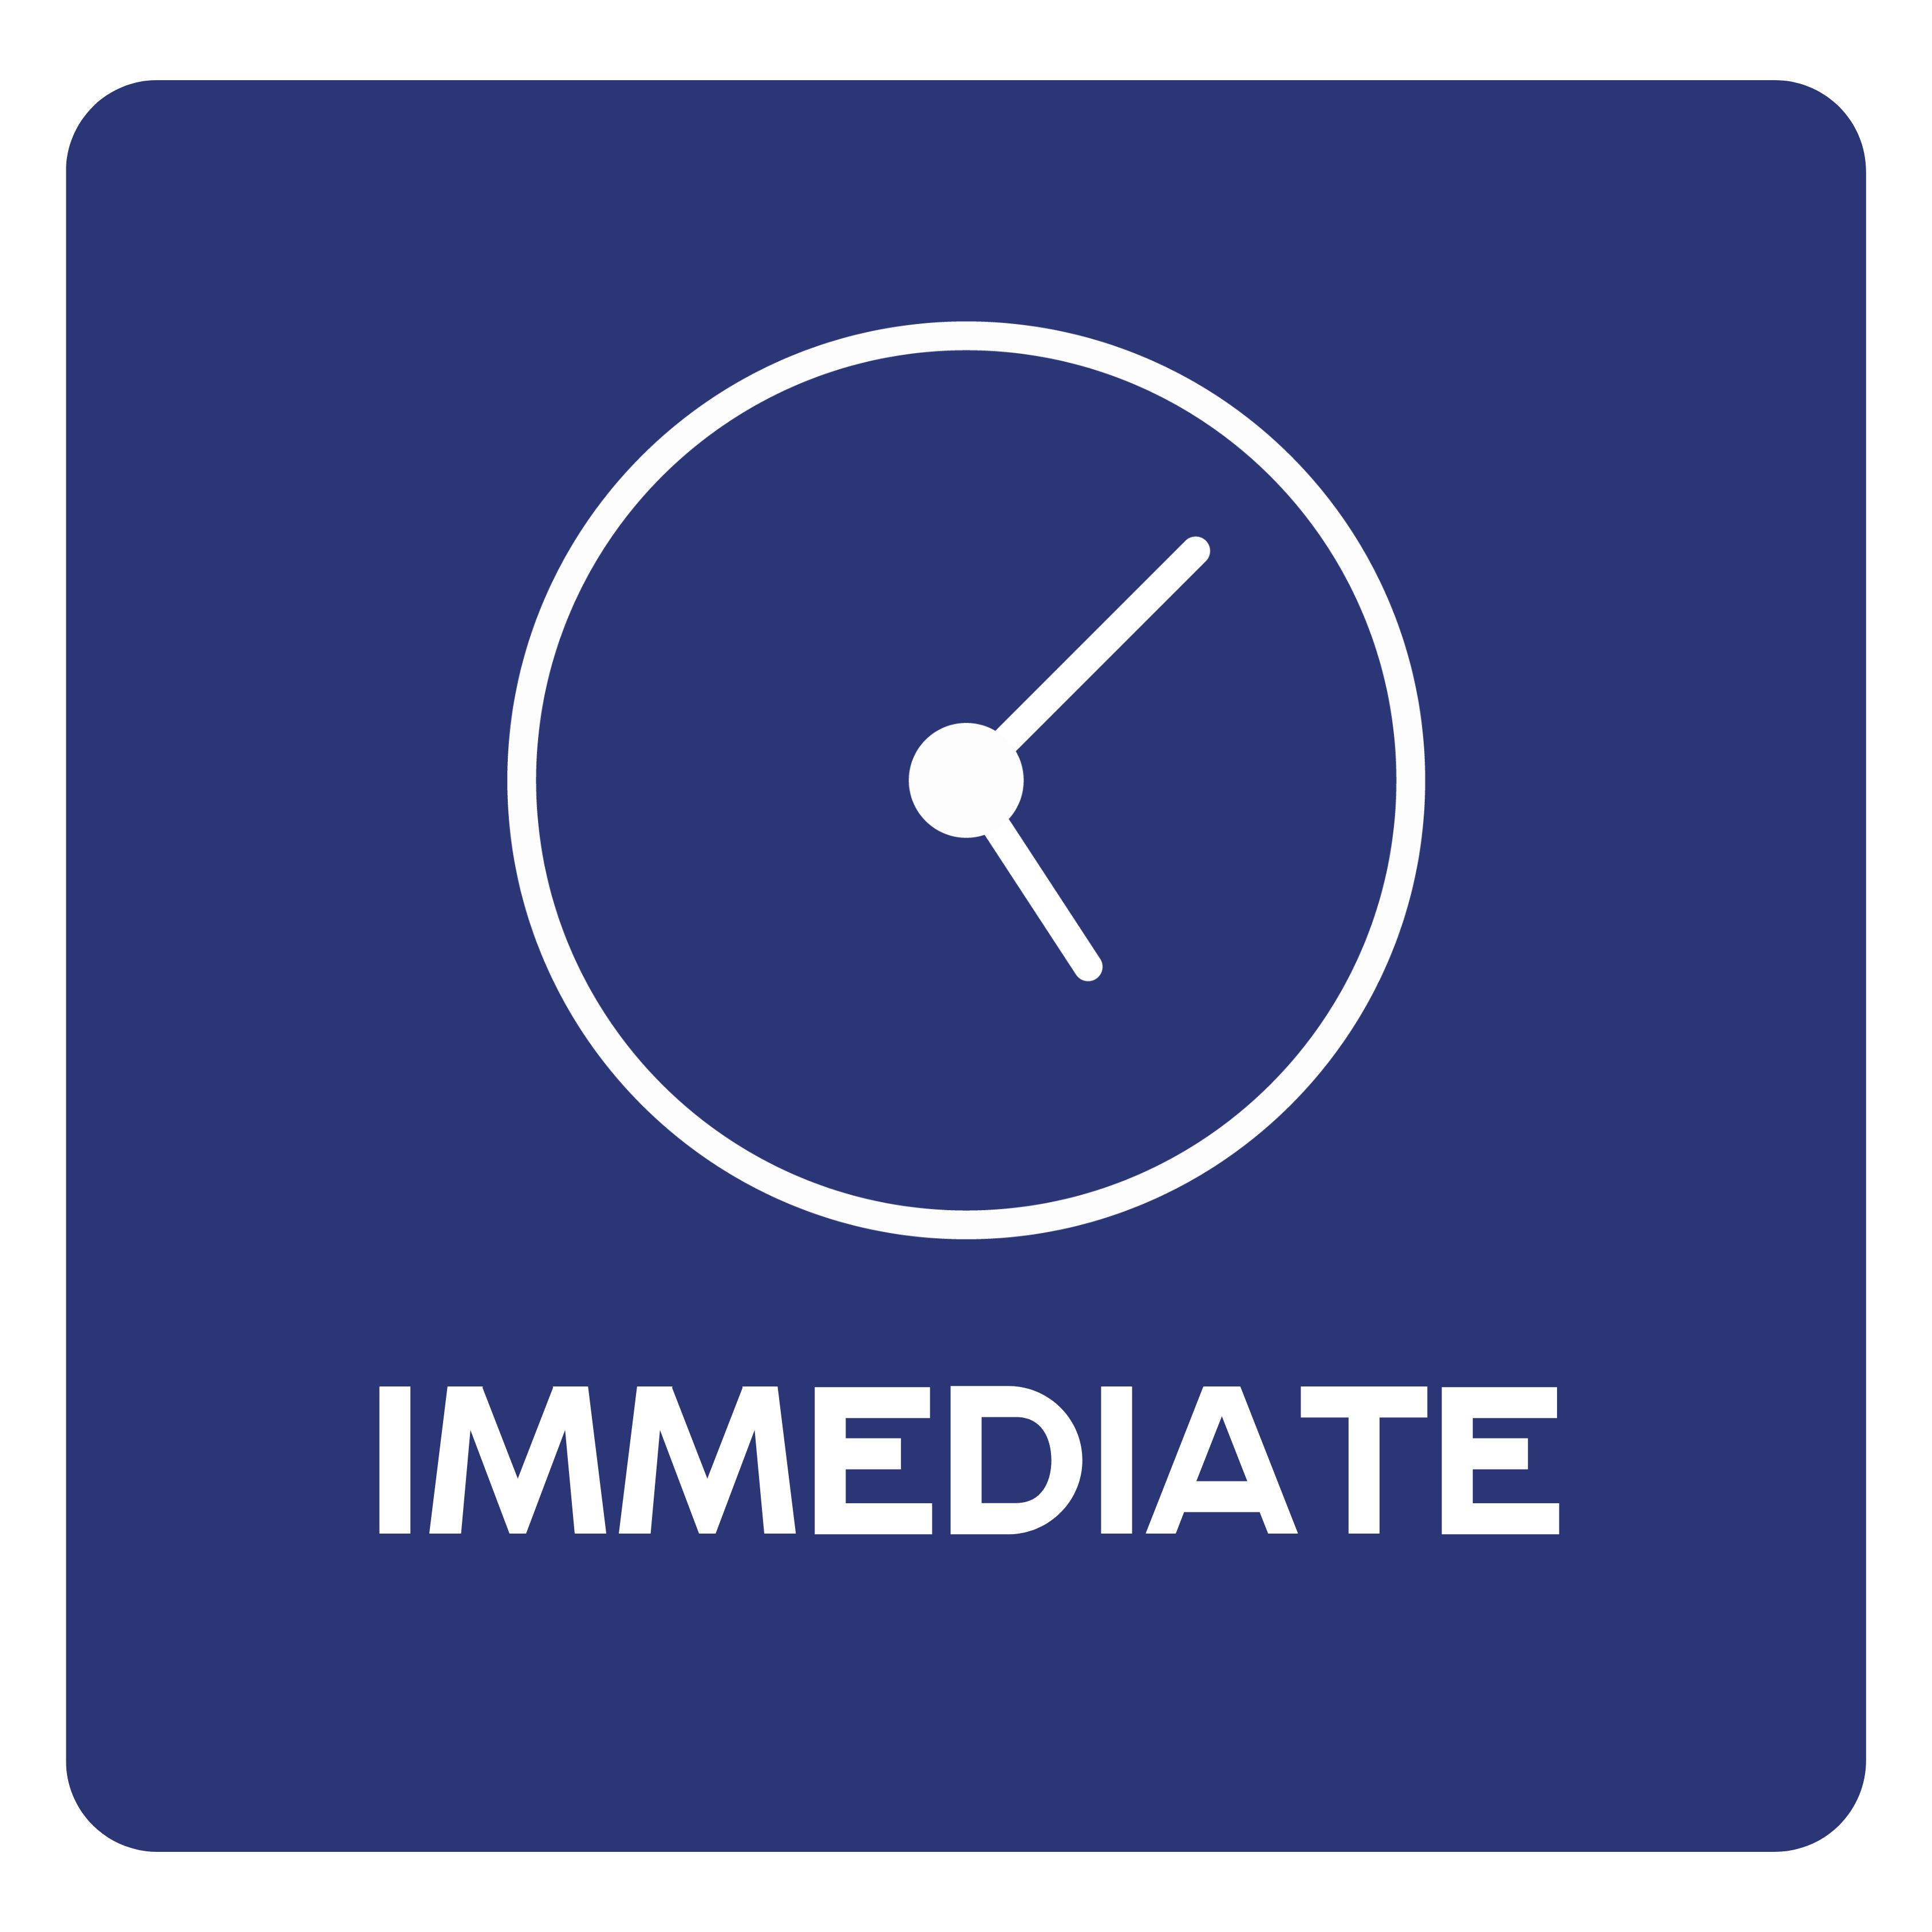 clock icon with the word immediate under it